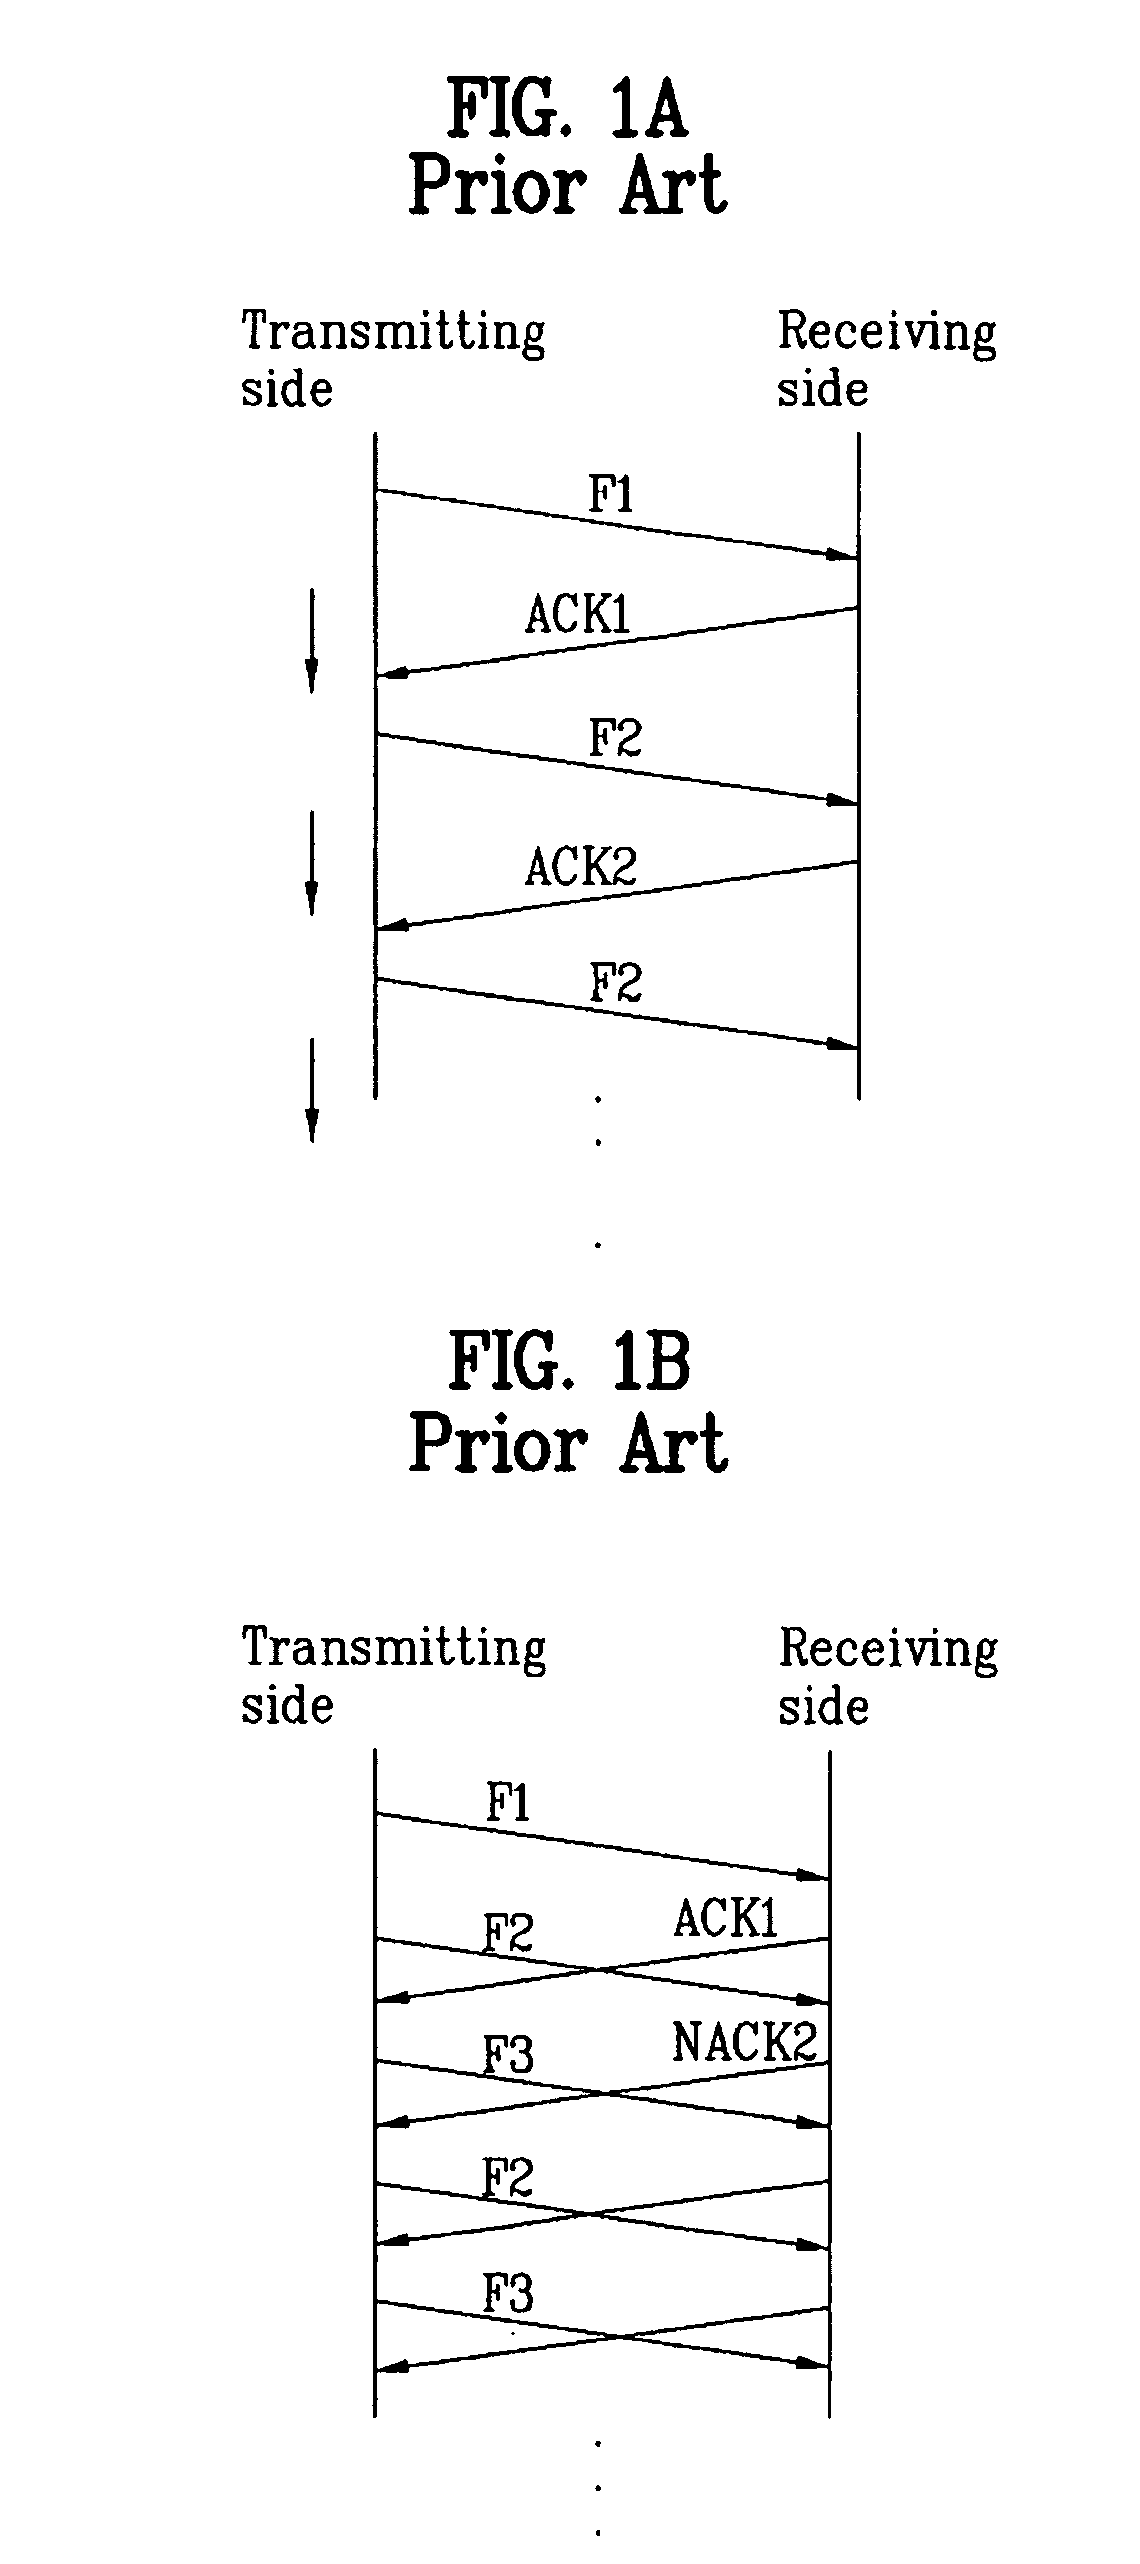 Supporting hybrid automatic retransmission request in orthogonal frequency division multiplexing access radio access system